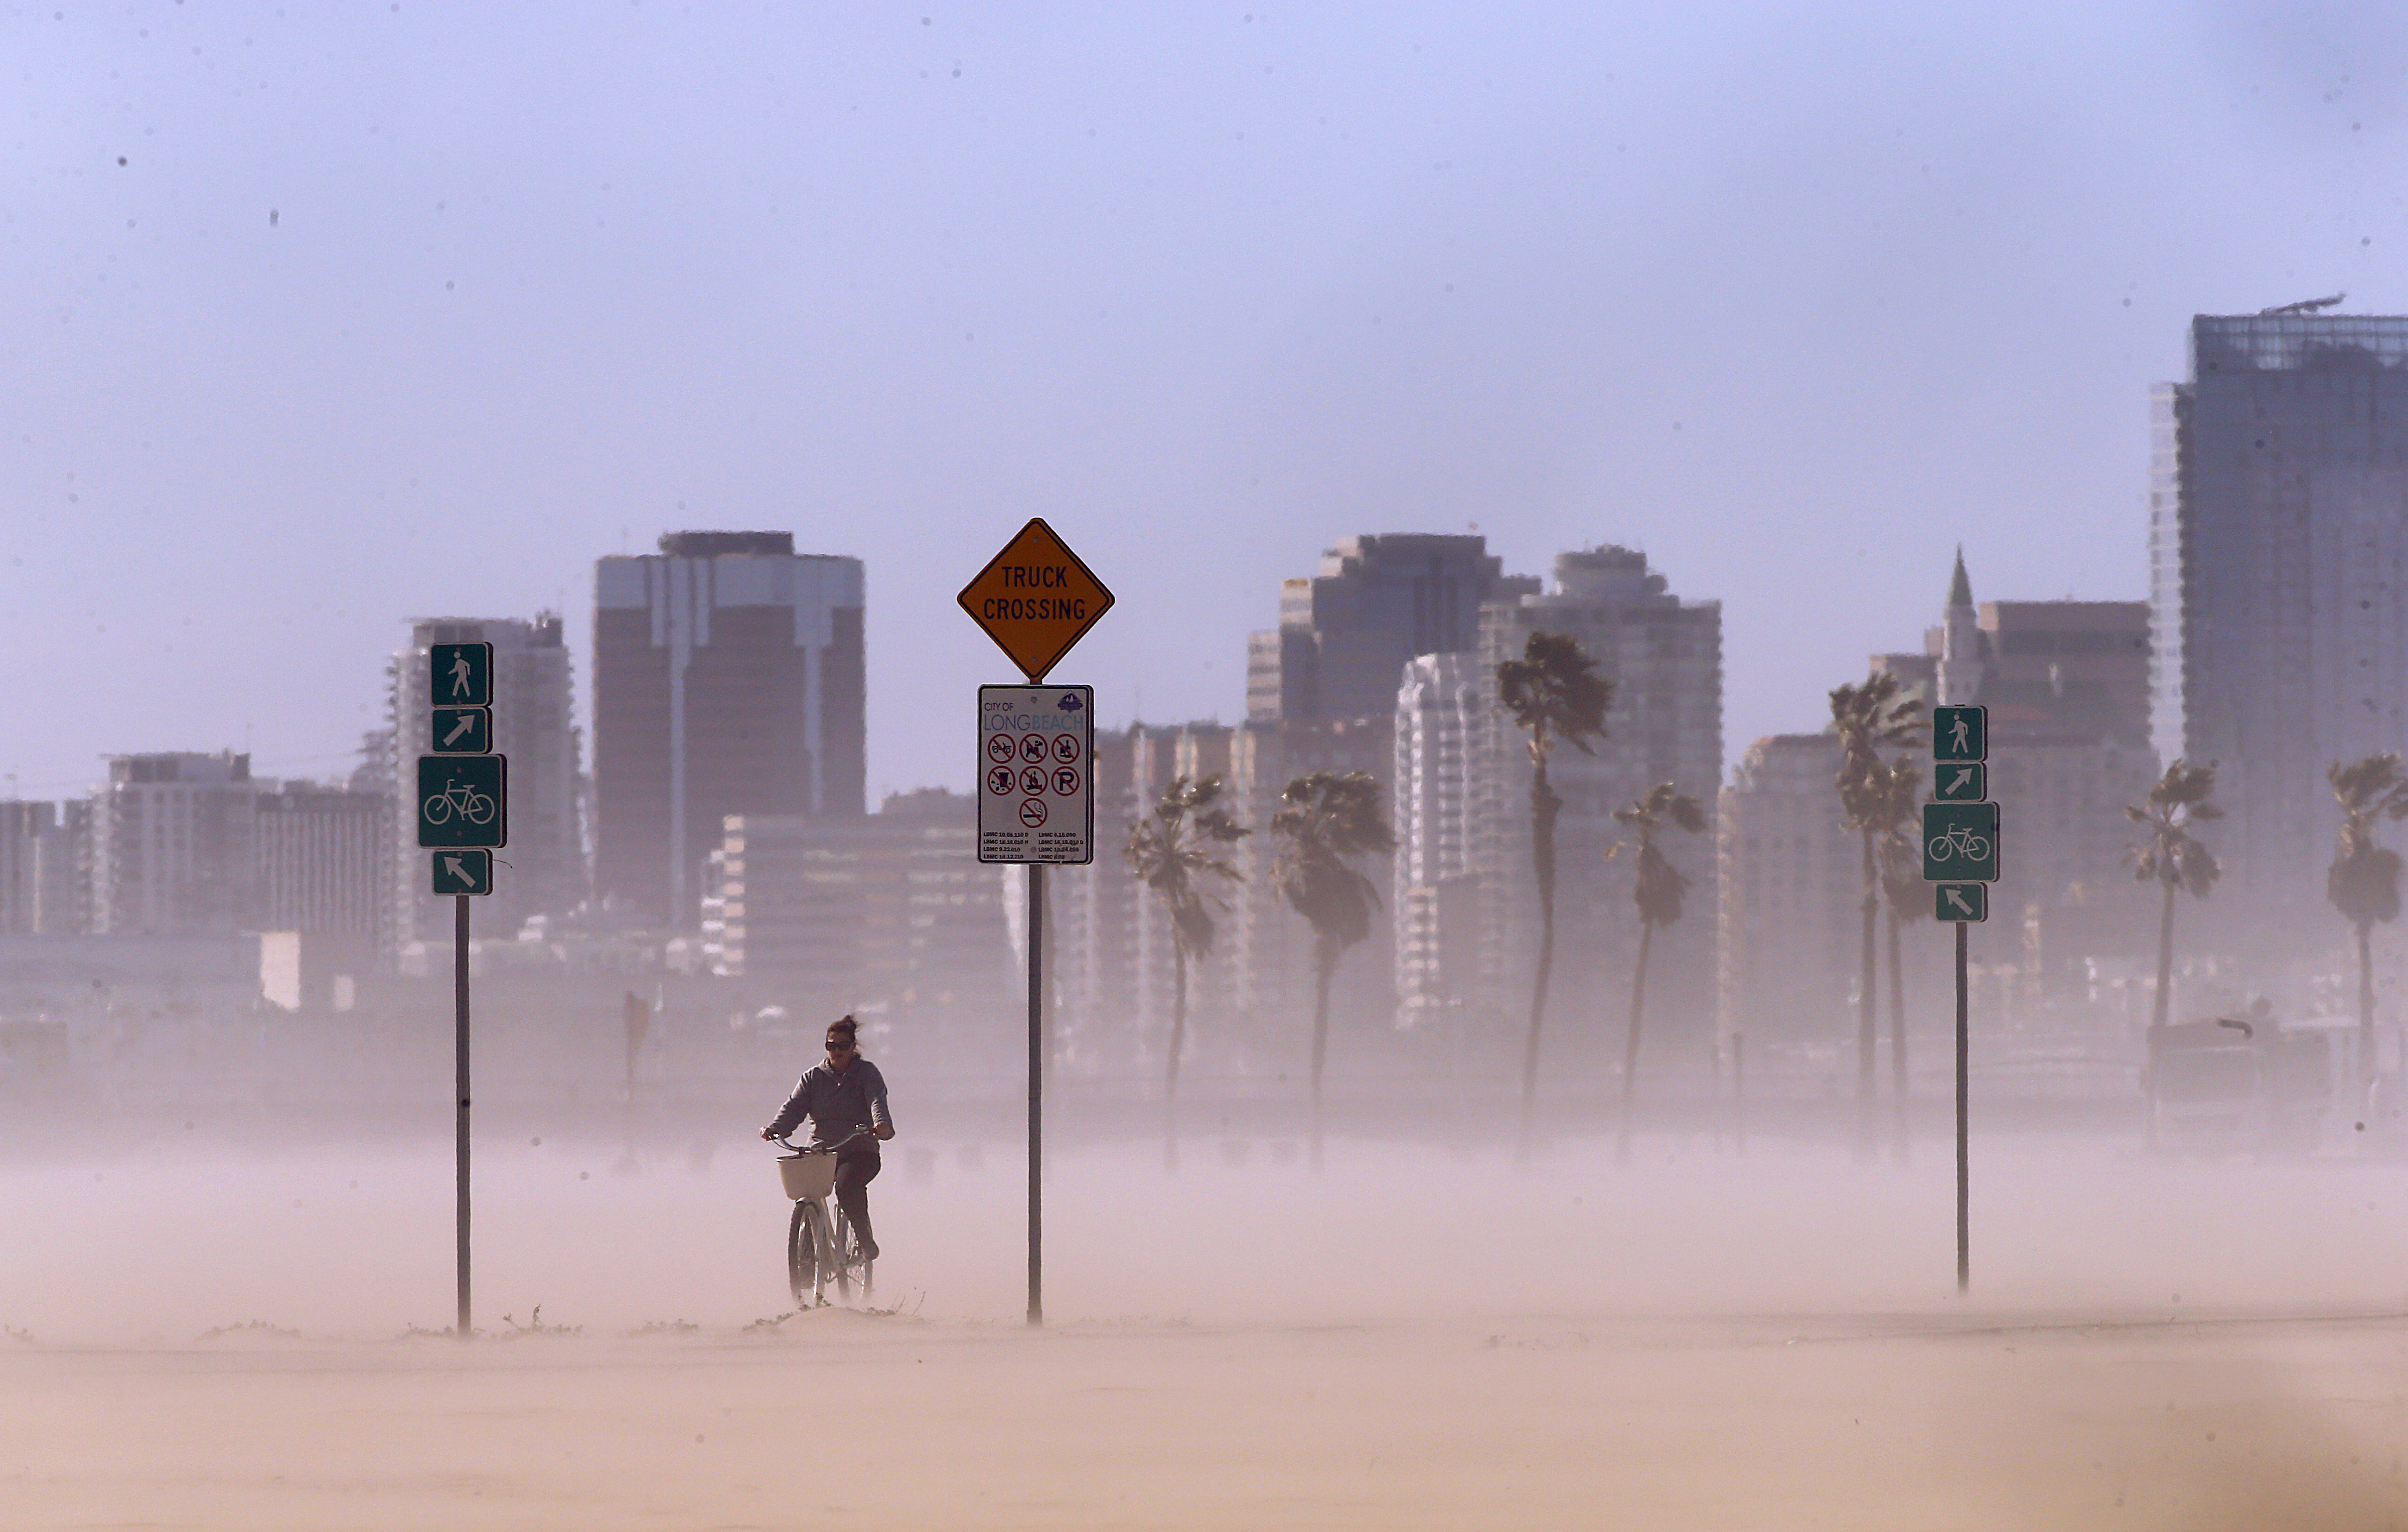 LONG BEACH, CALIF. - FEB. 22, 2023. Gusty winds kick up sand and dust in Long Beach on Wednesday, Feb. 22, 2023. More cold and wet weather, with high winds and surf, are forecast for Southern California as a Canadian cold front moves through the region this week. (Luis Sinco / Los Angeles Times via Getty Images)